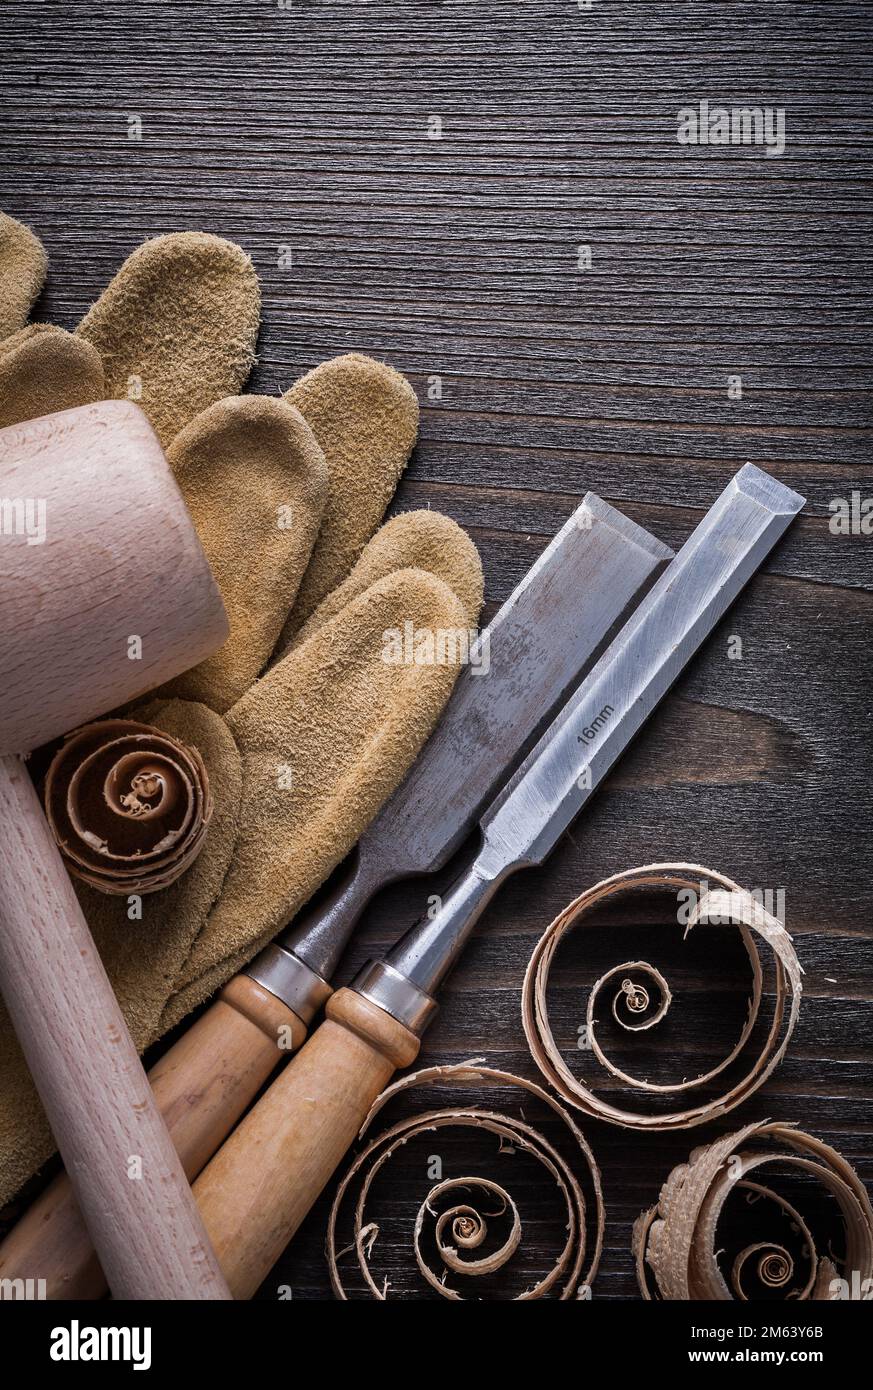 Brown leather gloves flat chisels wooden mallet and planning chips on vintage wood board vertical view construction concept. Stock Photo